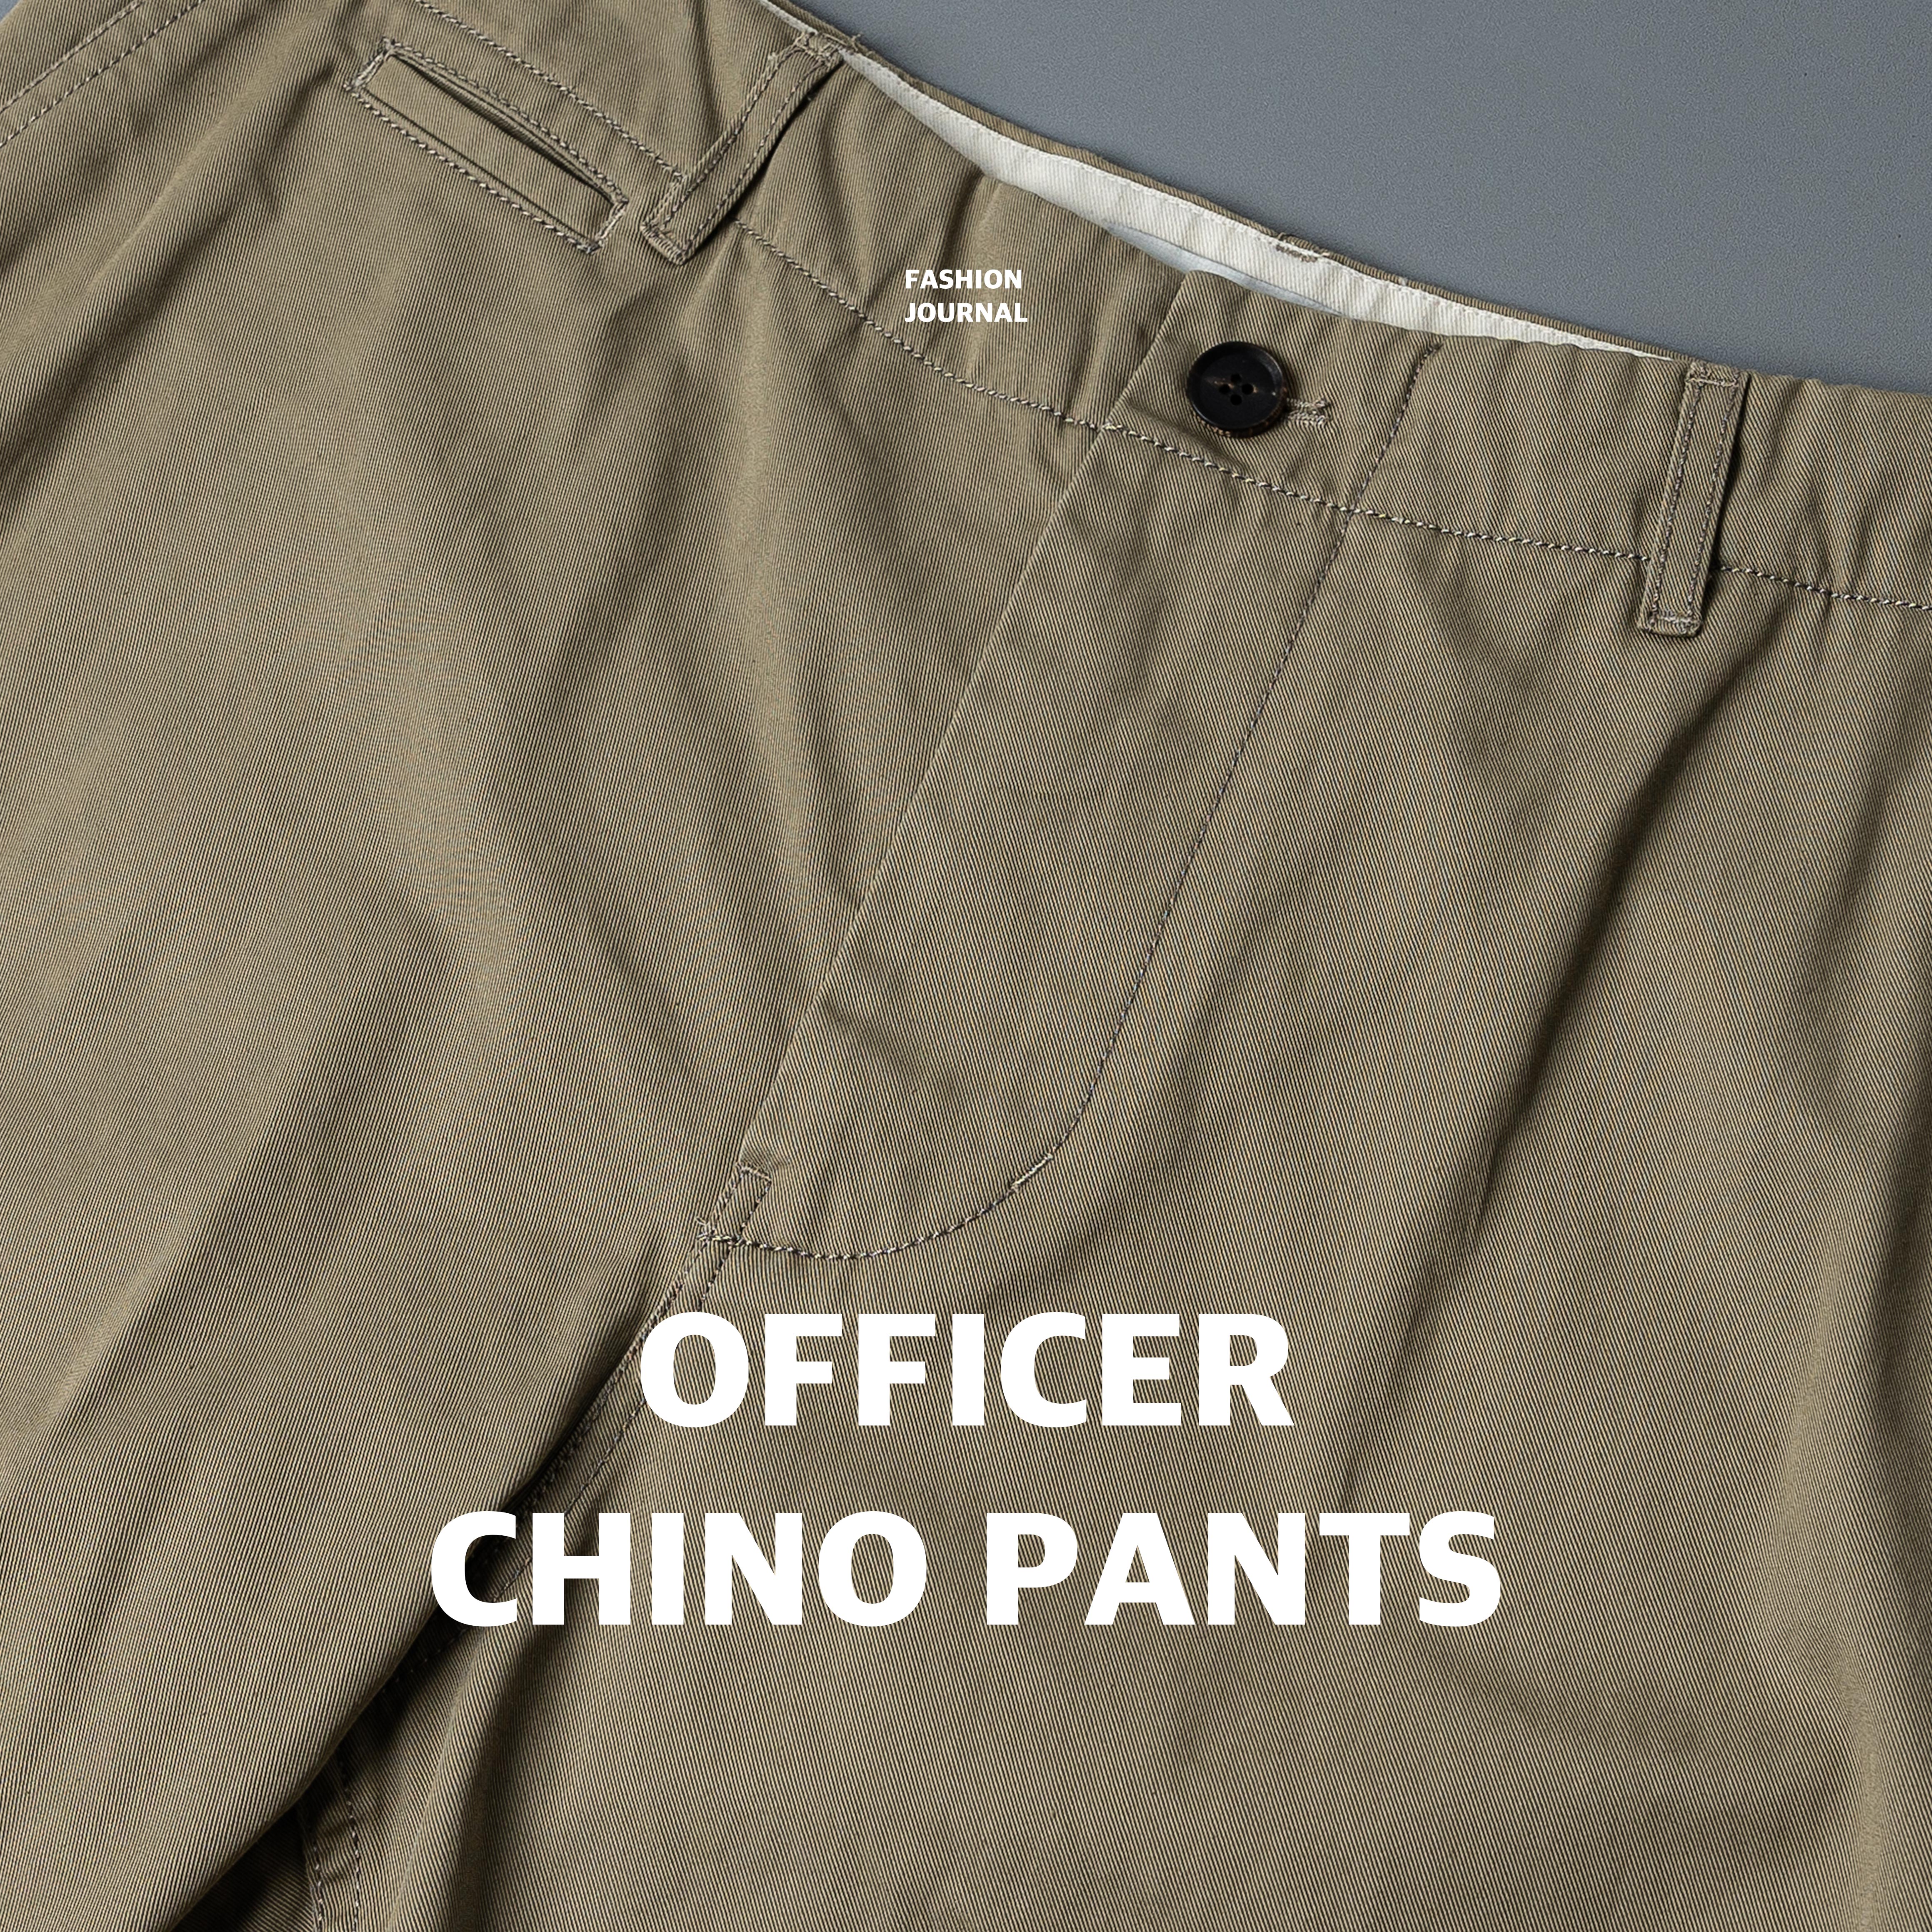 OFFICER CHINO PANTS